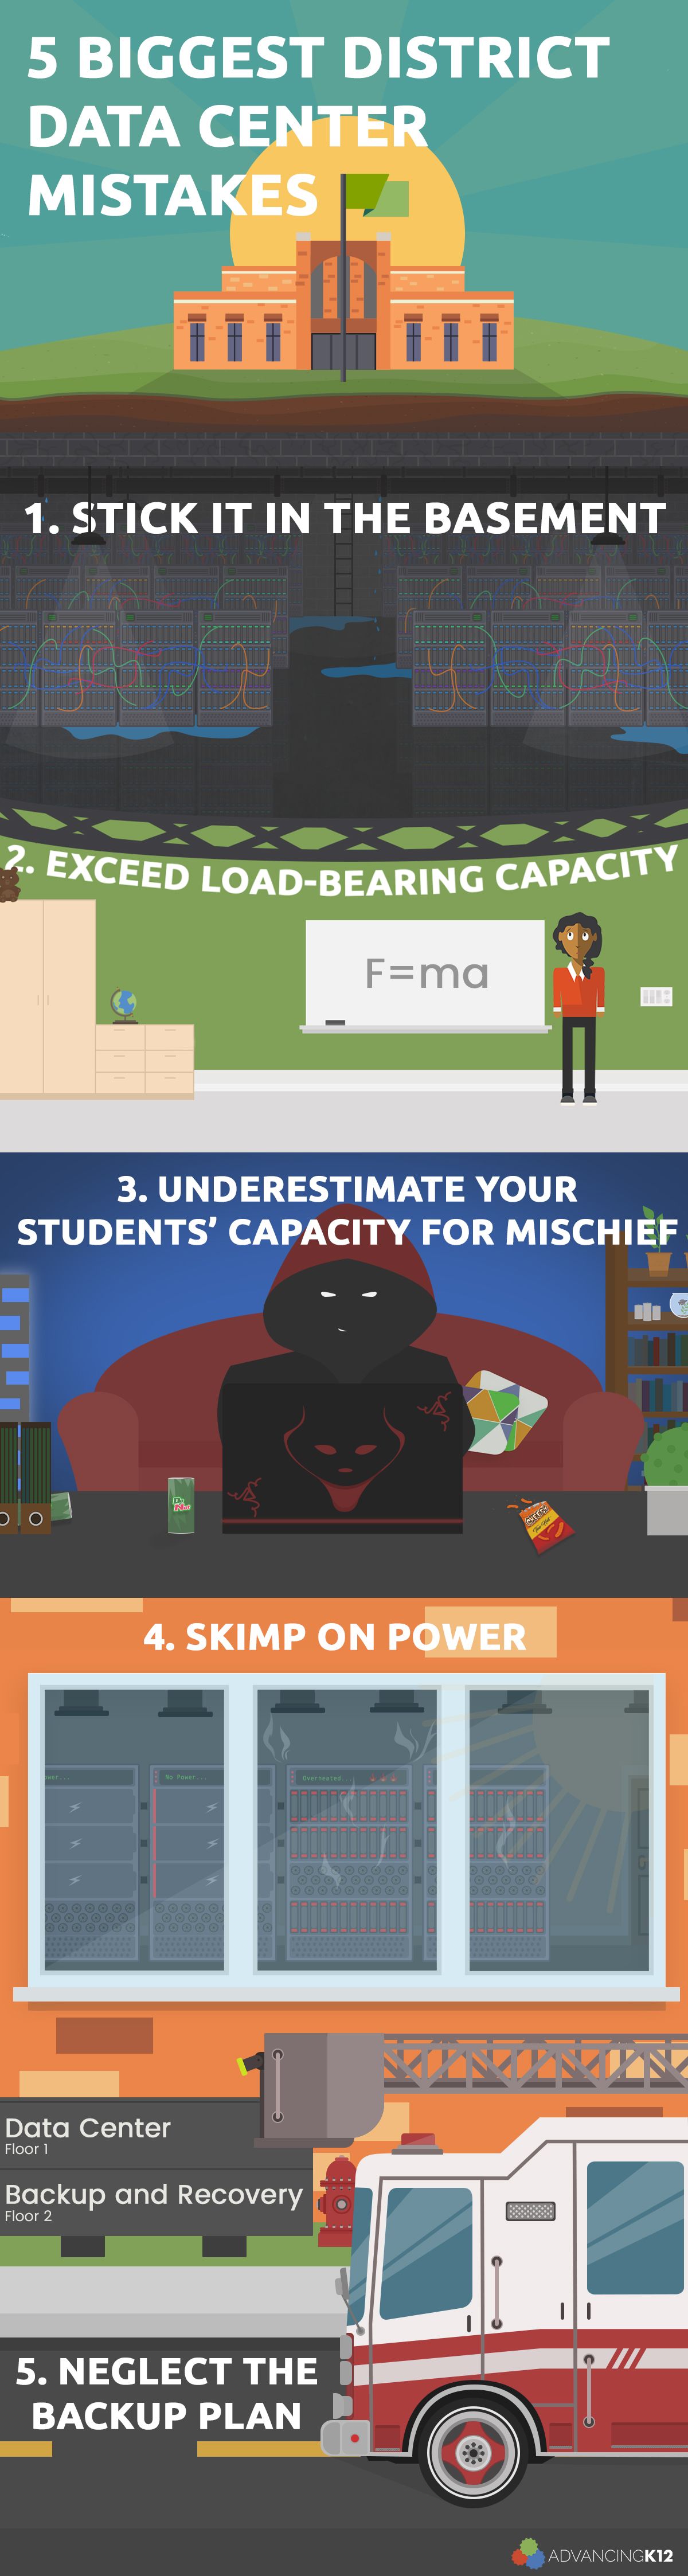 Data Center Mistakes Infographic